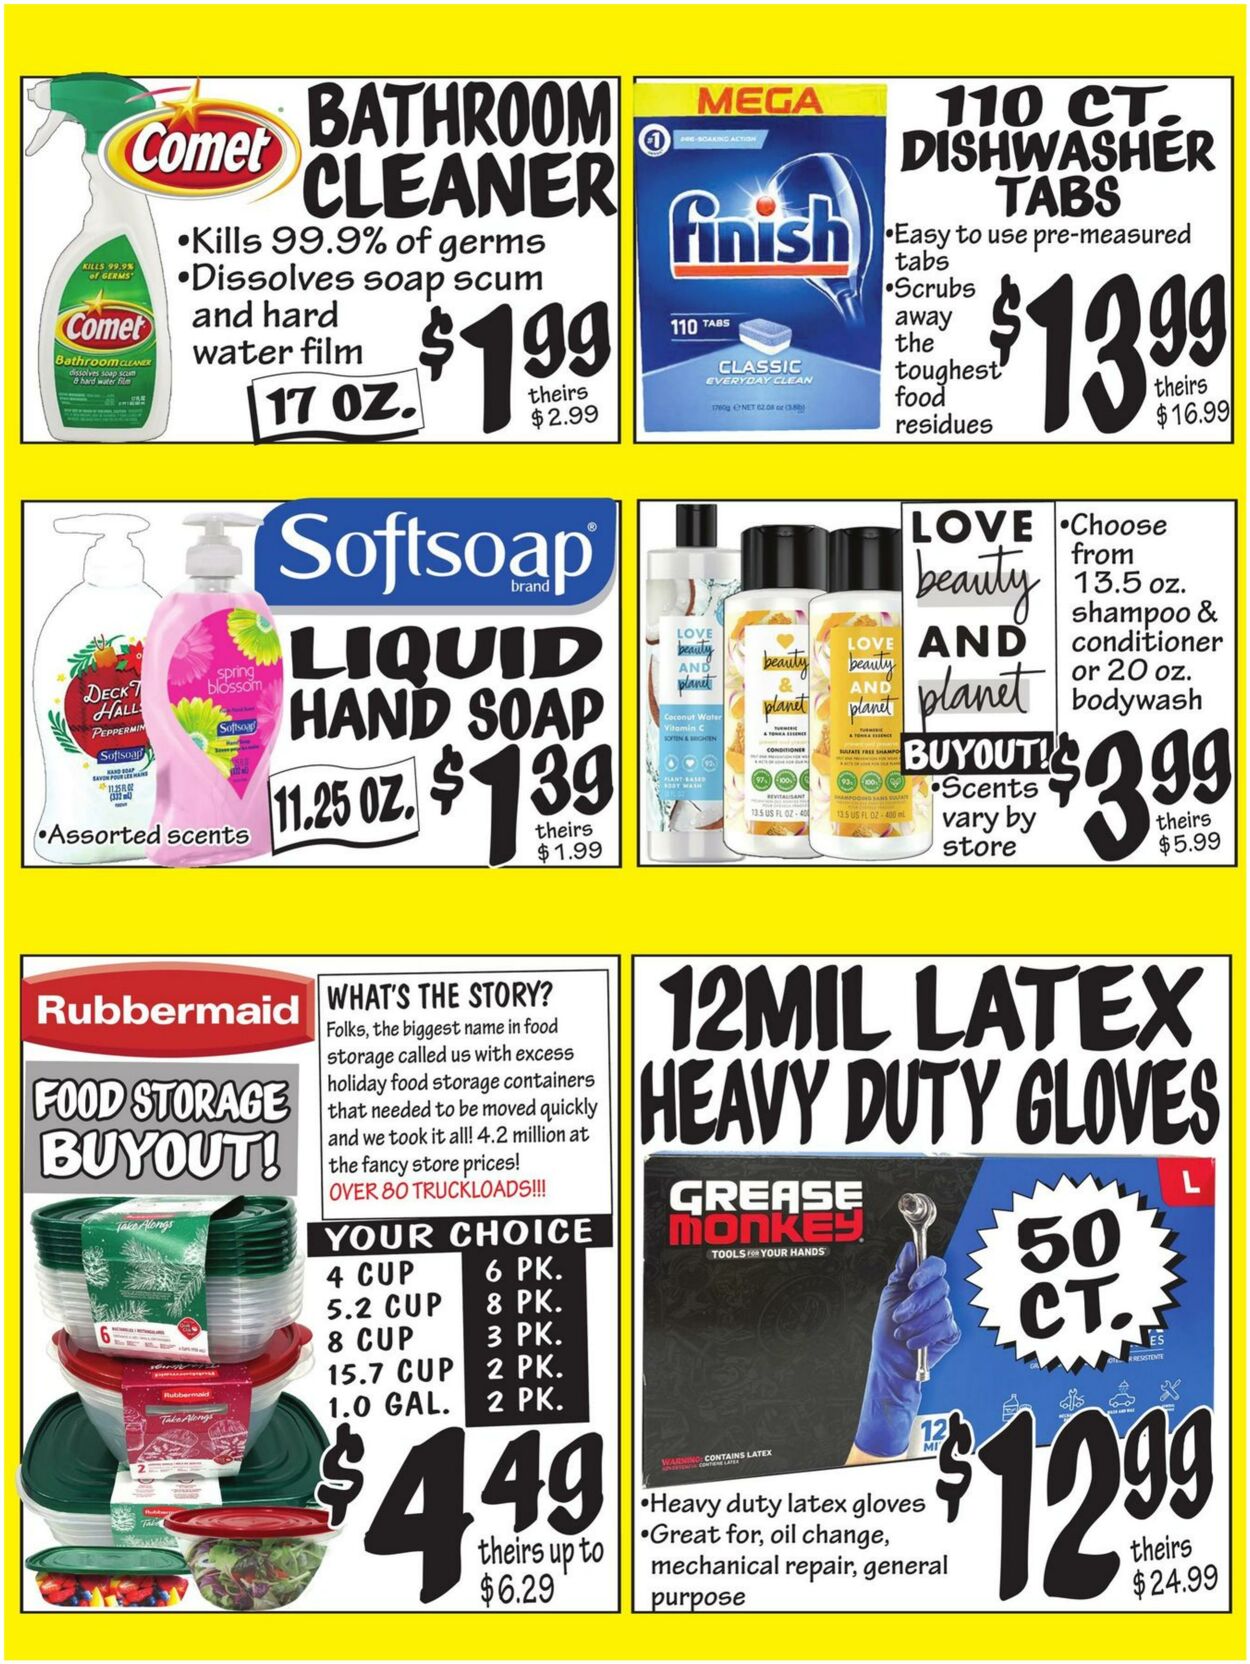 Weekly ad Ollie's 05/18/2022 - 05/24/2022